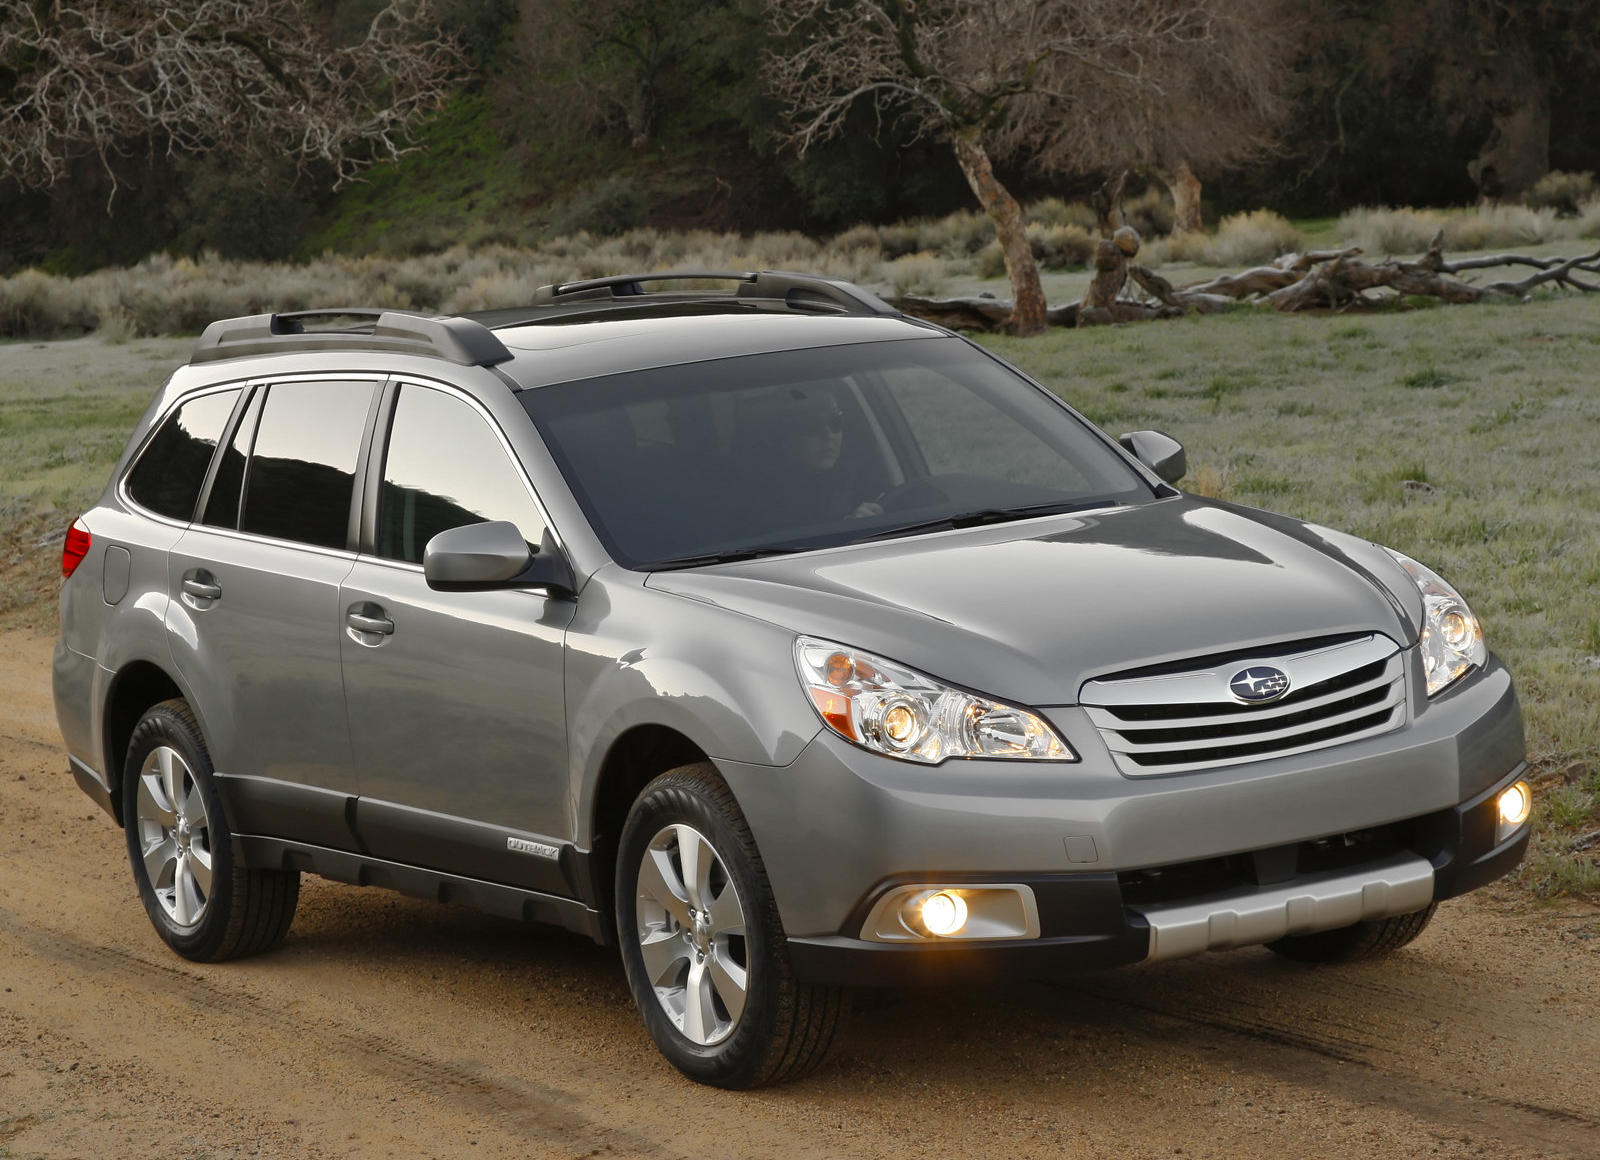 2011 Subaru Outback Front View Driving